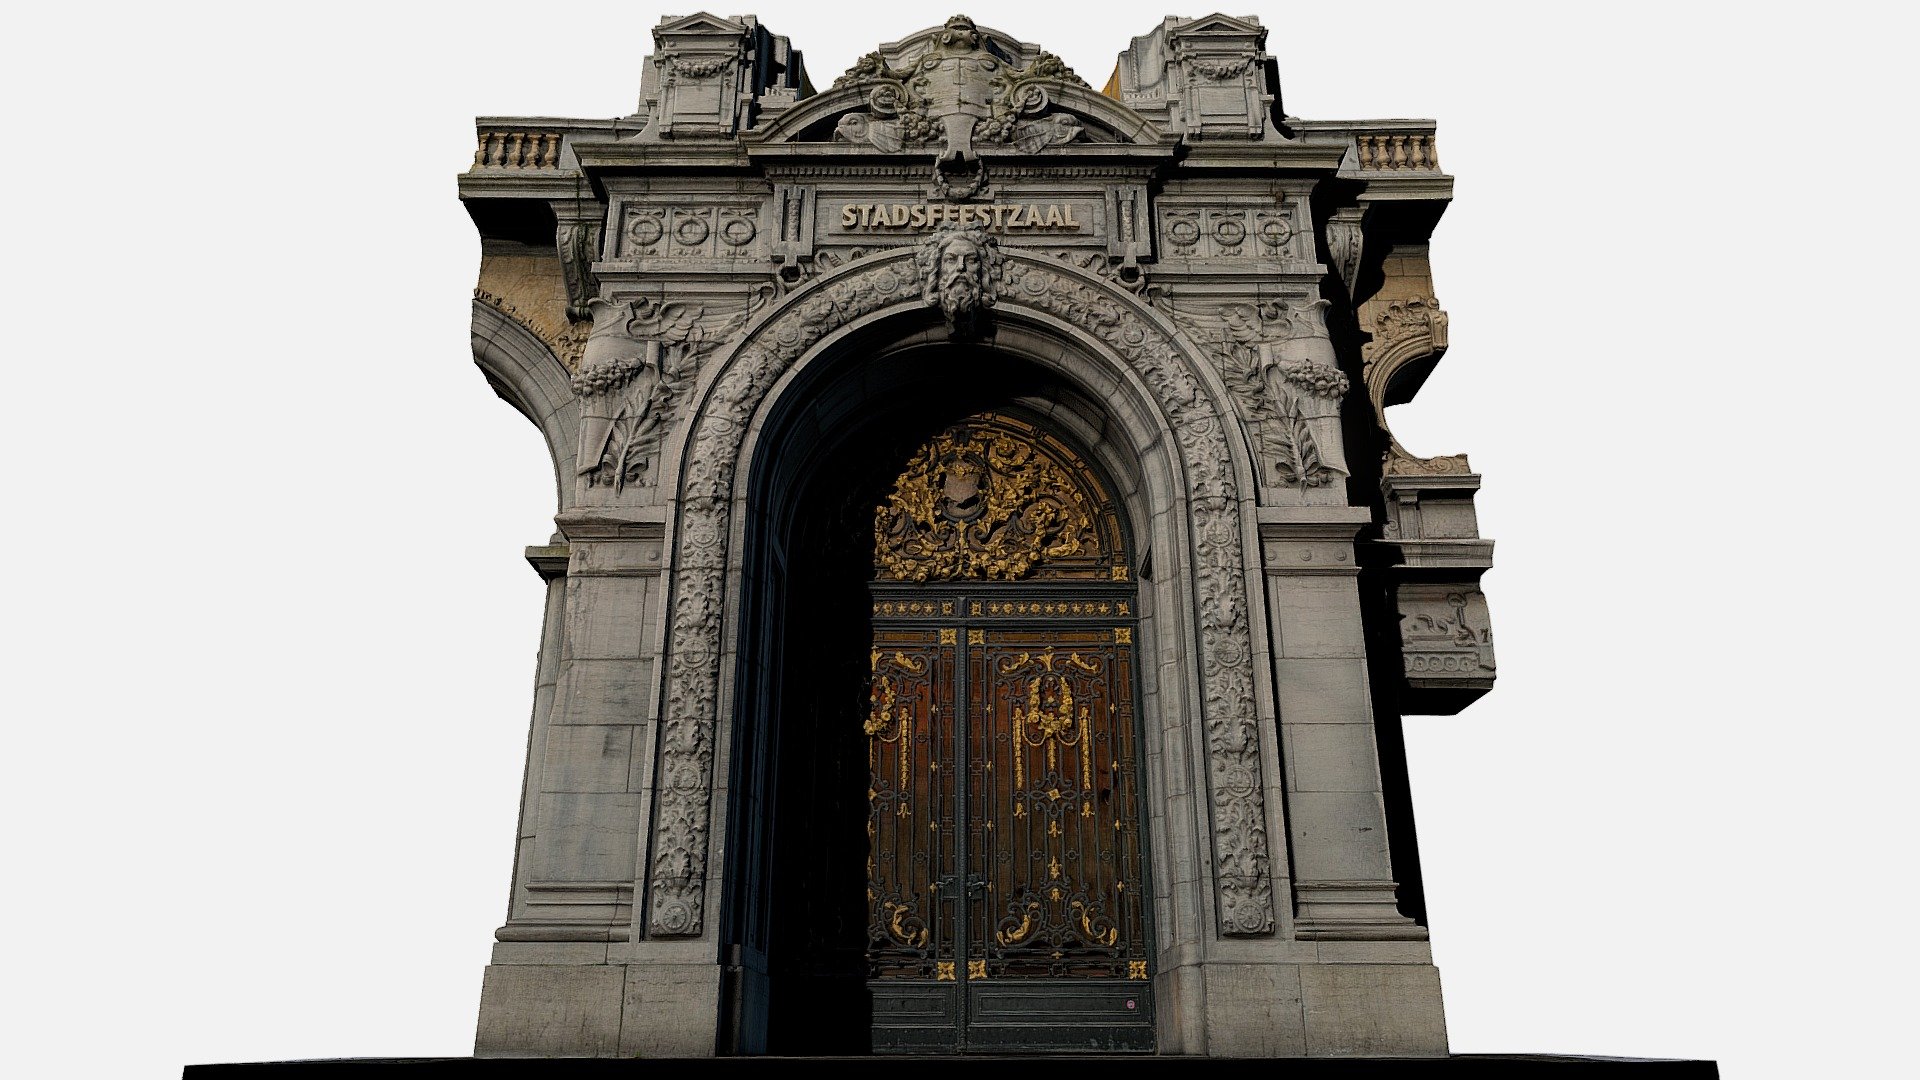 Although most shoppers never pause to examine the surrounding buildings, the Meir shopping street in Antwerp exhibits some of the most awe-inspiring architecture the city has to offer. 

This 3D scan shows the main entrance to the Neoclassical Stadsfeestzaal, which was originally inaugurated as a banquet and exhibition hall in the early 20th century. If anything the building's interior is even more glamorous than its exterior, and my grandmother has fond memories of the formal balls that used to take place here. 

Since 1983 the building is classified as a protected monument. After a devastating fire in 2000 the building was beautifully renovated and is now used as a shopping center. 

Exterior: 

Interior: 


Photogrammetry model, pictures taken with Nikon D5300 and AF-S NIKKOR 35mm 1:1.8G lens, reconstructed in RealityCapture, decimated in ZBrush. Backfaces built in 3ds Max by Shawn Mitford 3d model